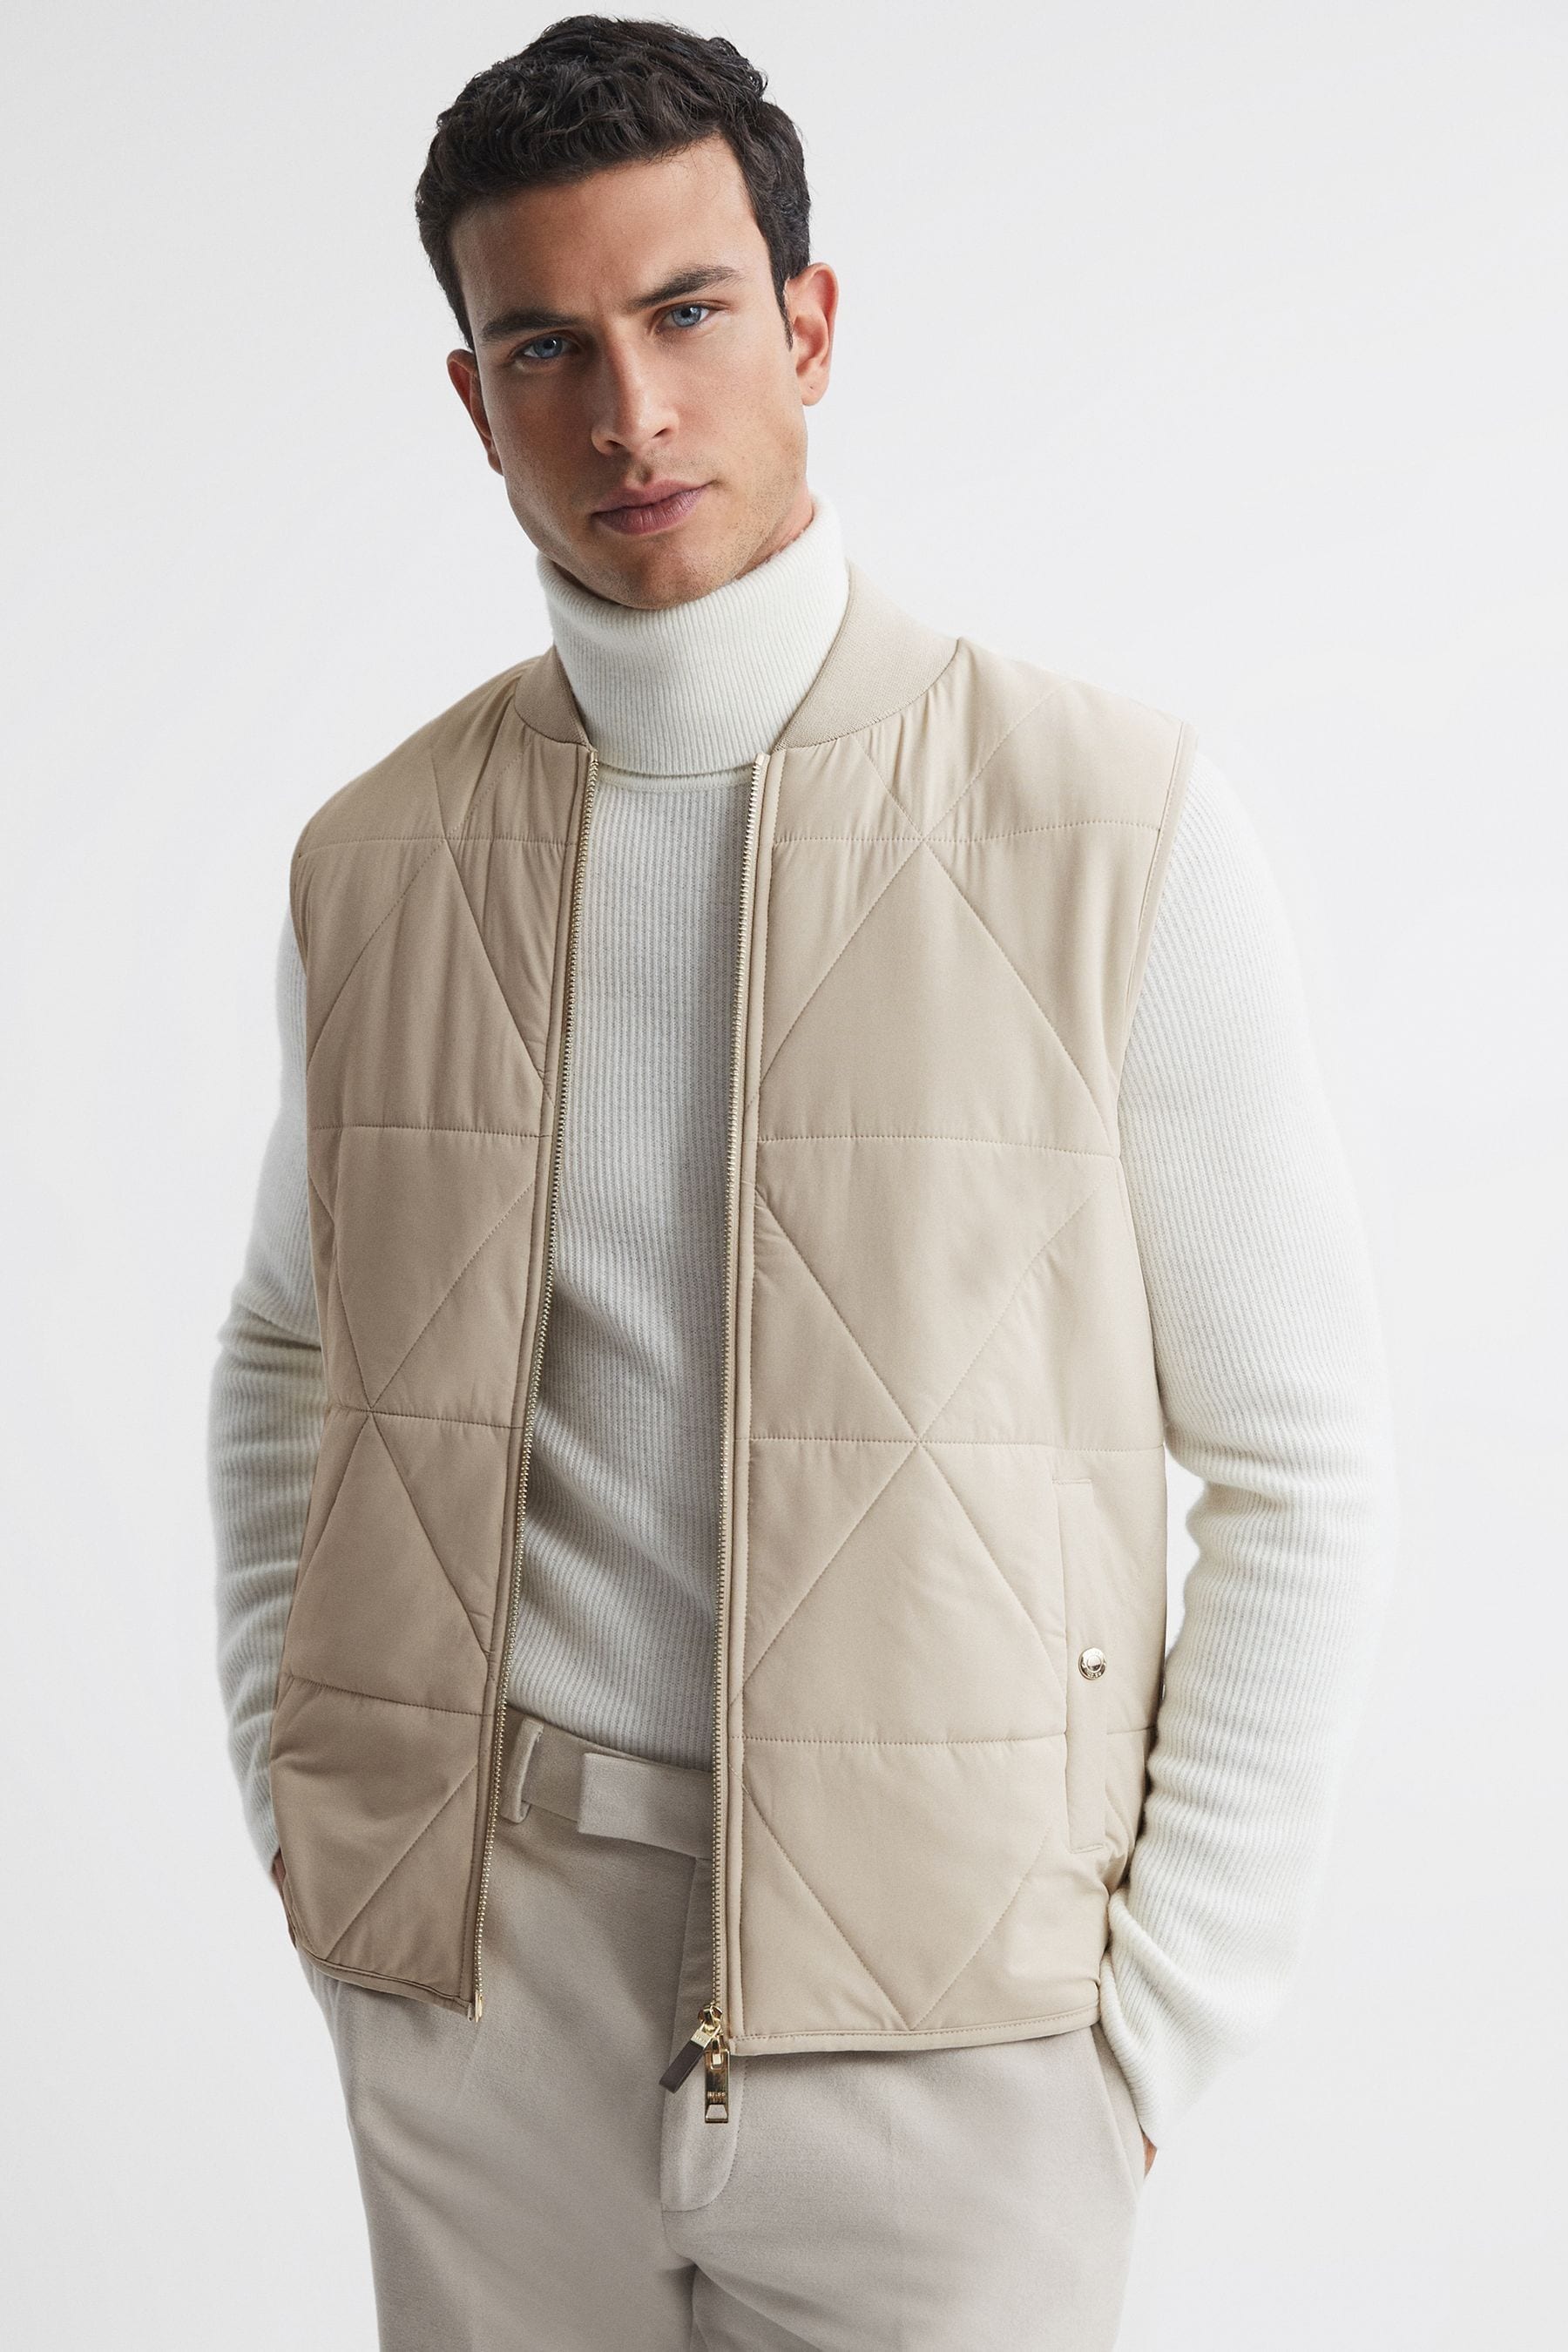 Reiss Ritchie - Stone Hybrid Knitted-quilted Sleeveless Jacket, M